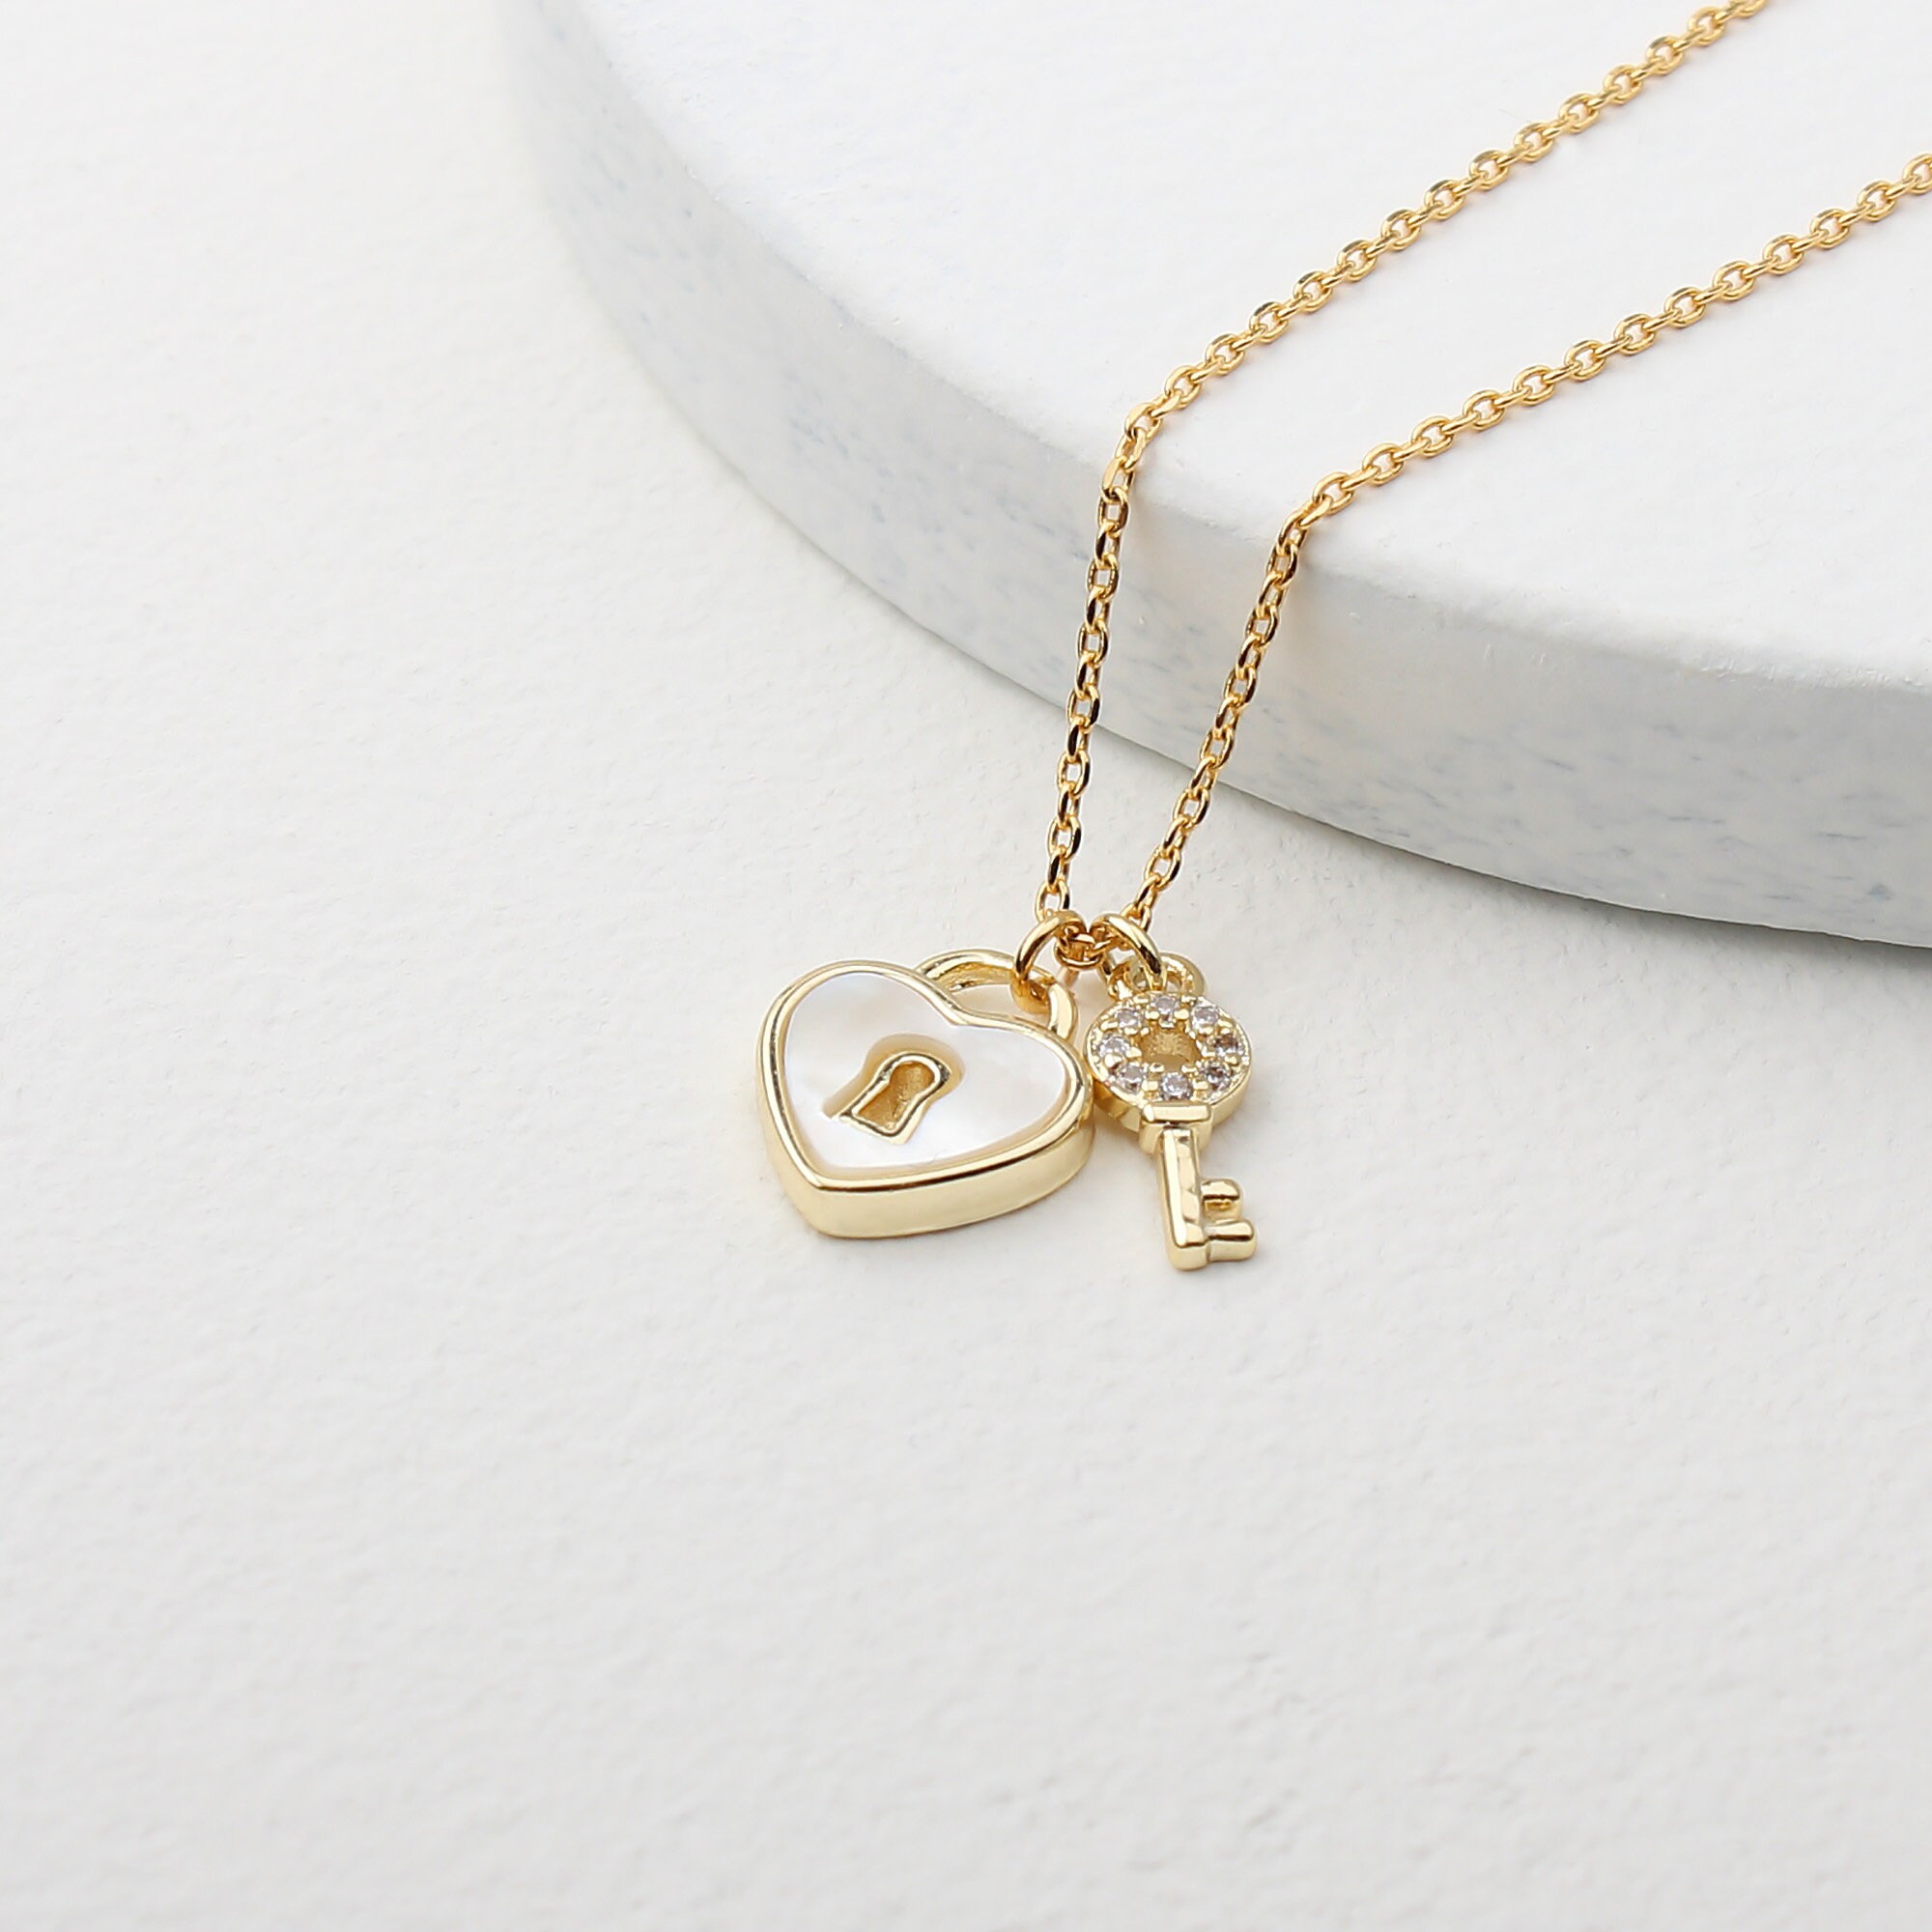 Gold Lock and Key Necklace Mother of Pearl Heart Lock With - Etsy